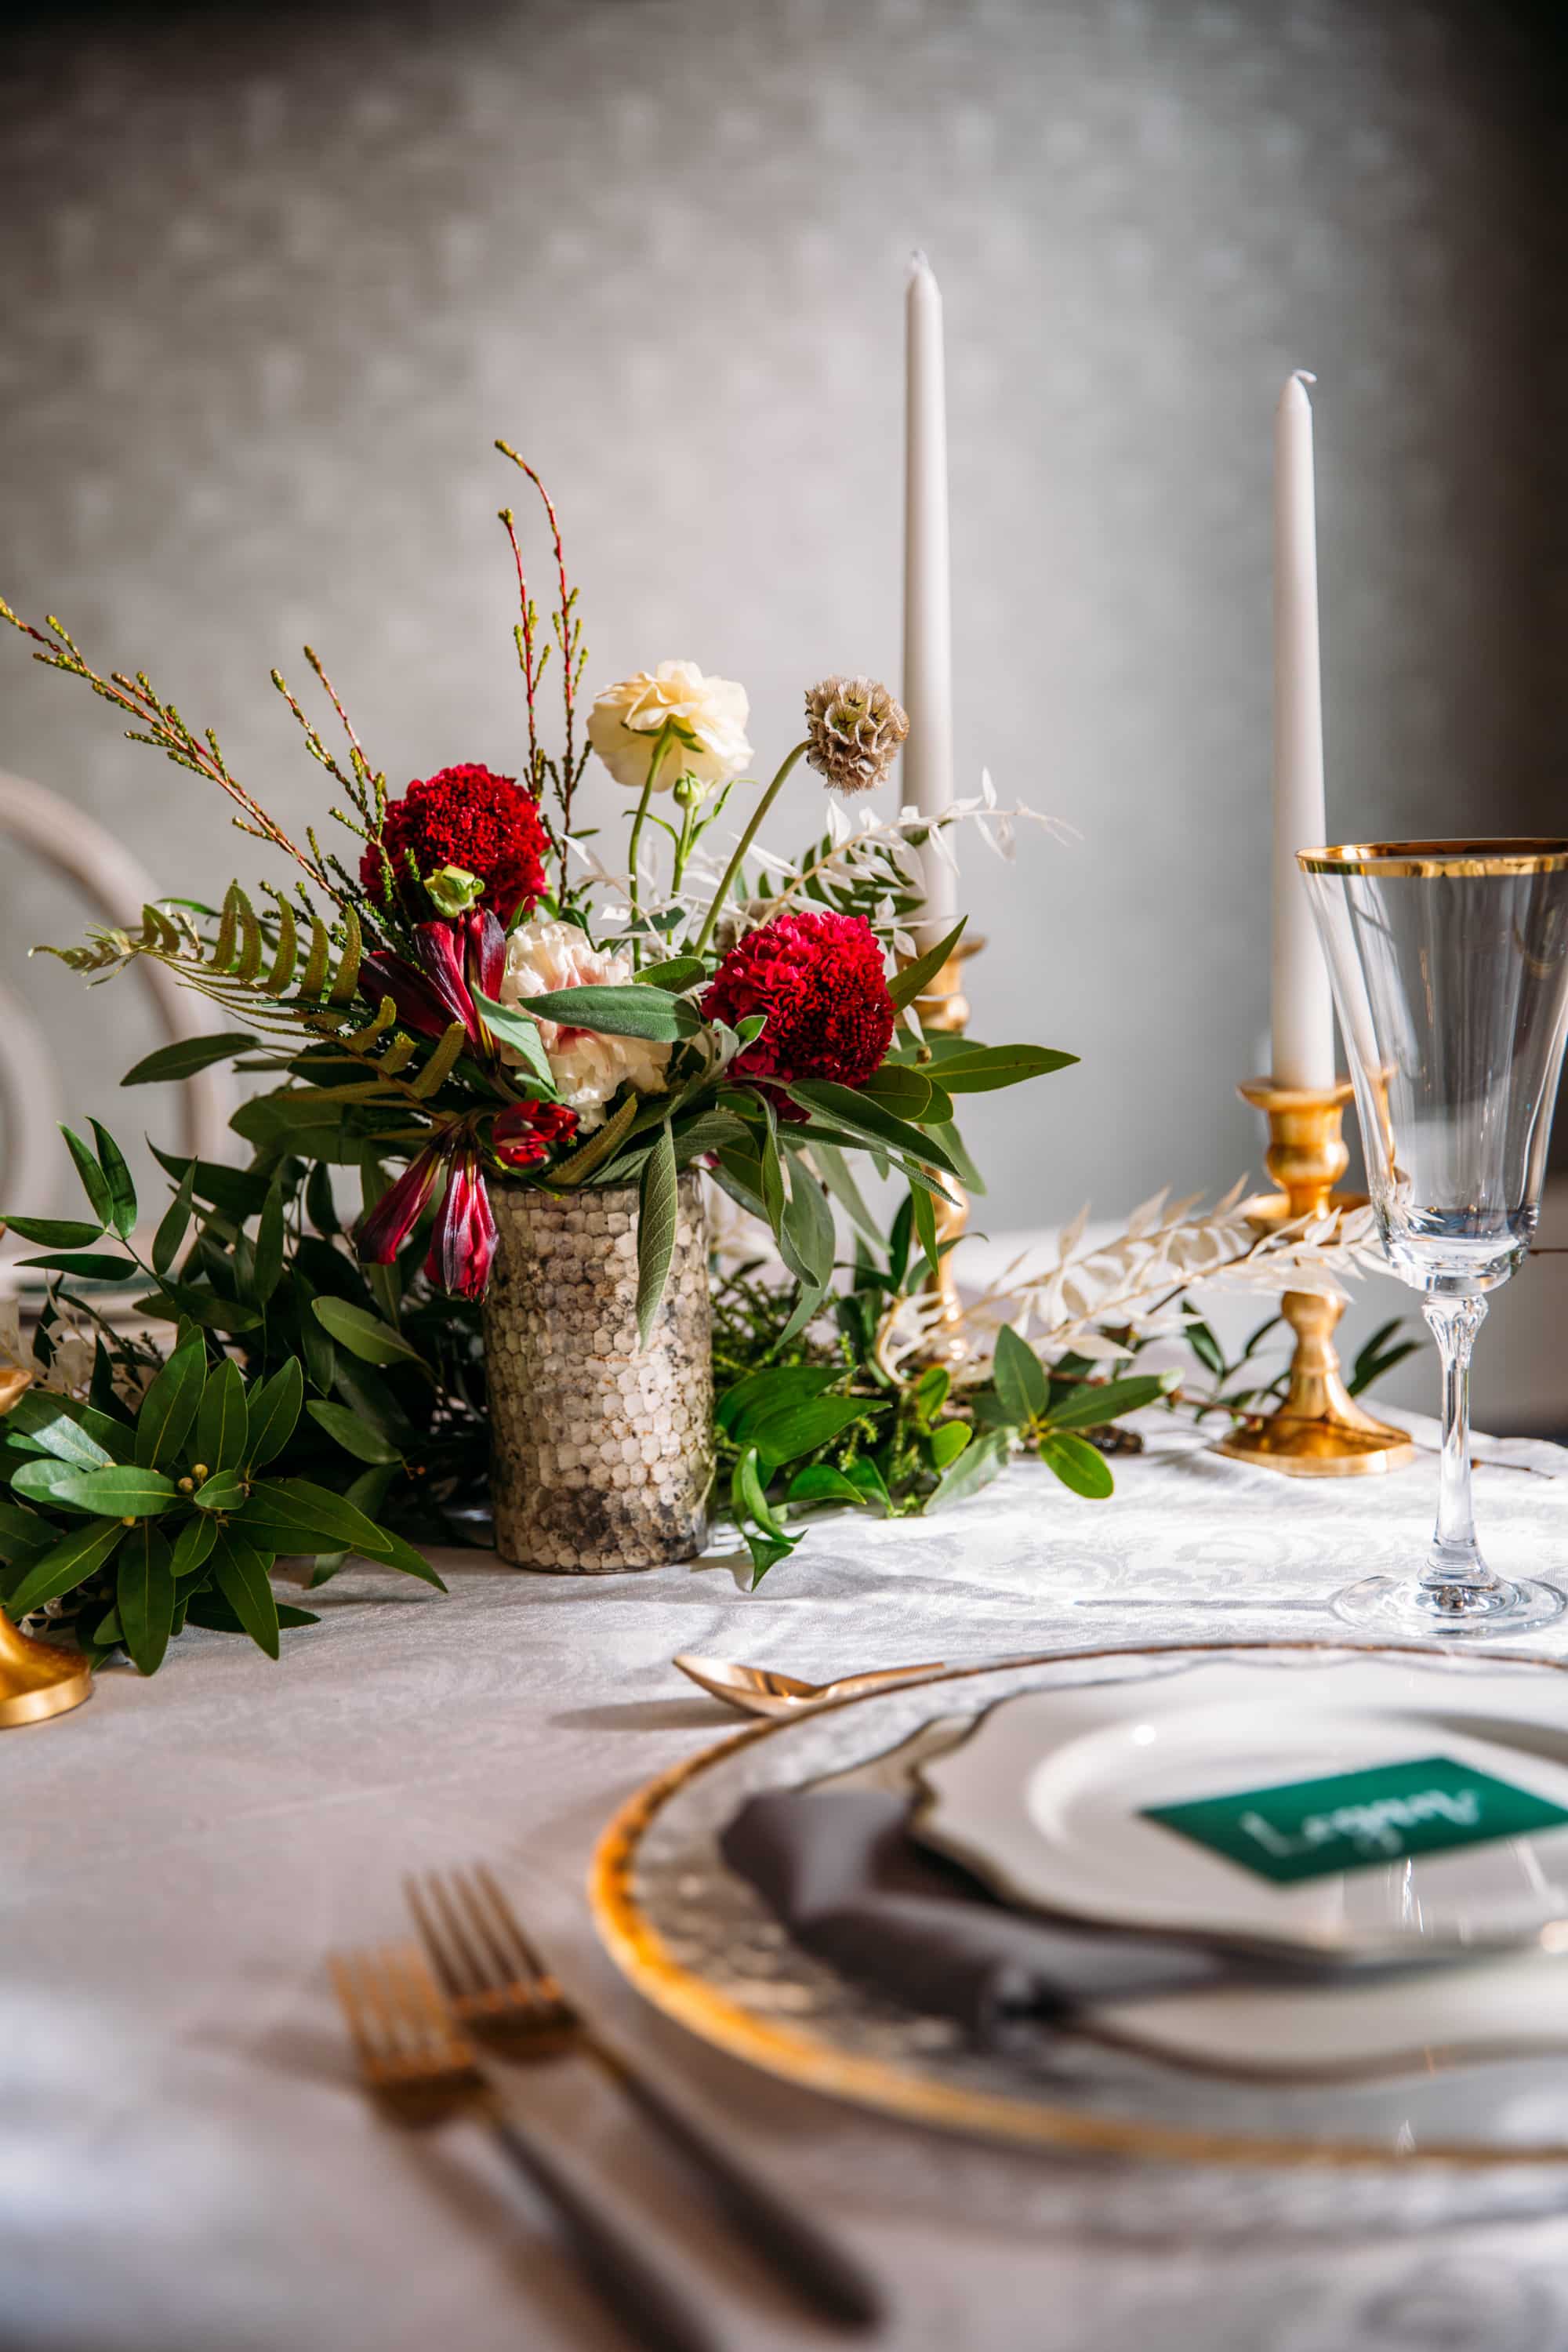 emerald wedding, wedding color inspiration, emerald and gold wedding, emerald and mustard wedding colors, gold silverware, elegant wedding tablescape, emerald wedding name tags, emerald name cards for table, white and gold candles, red and white wedding florals